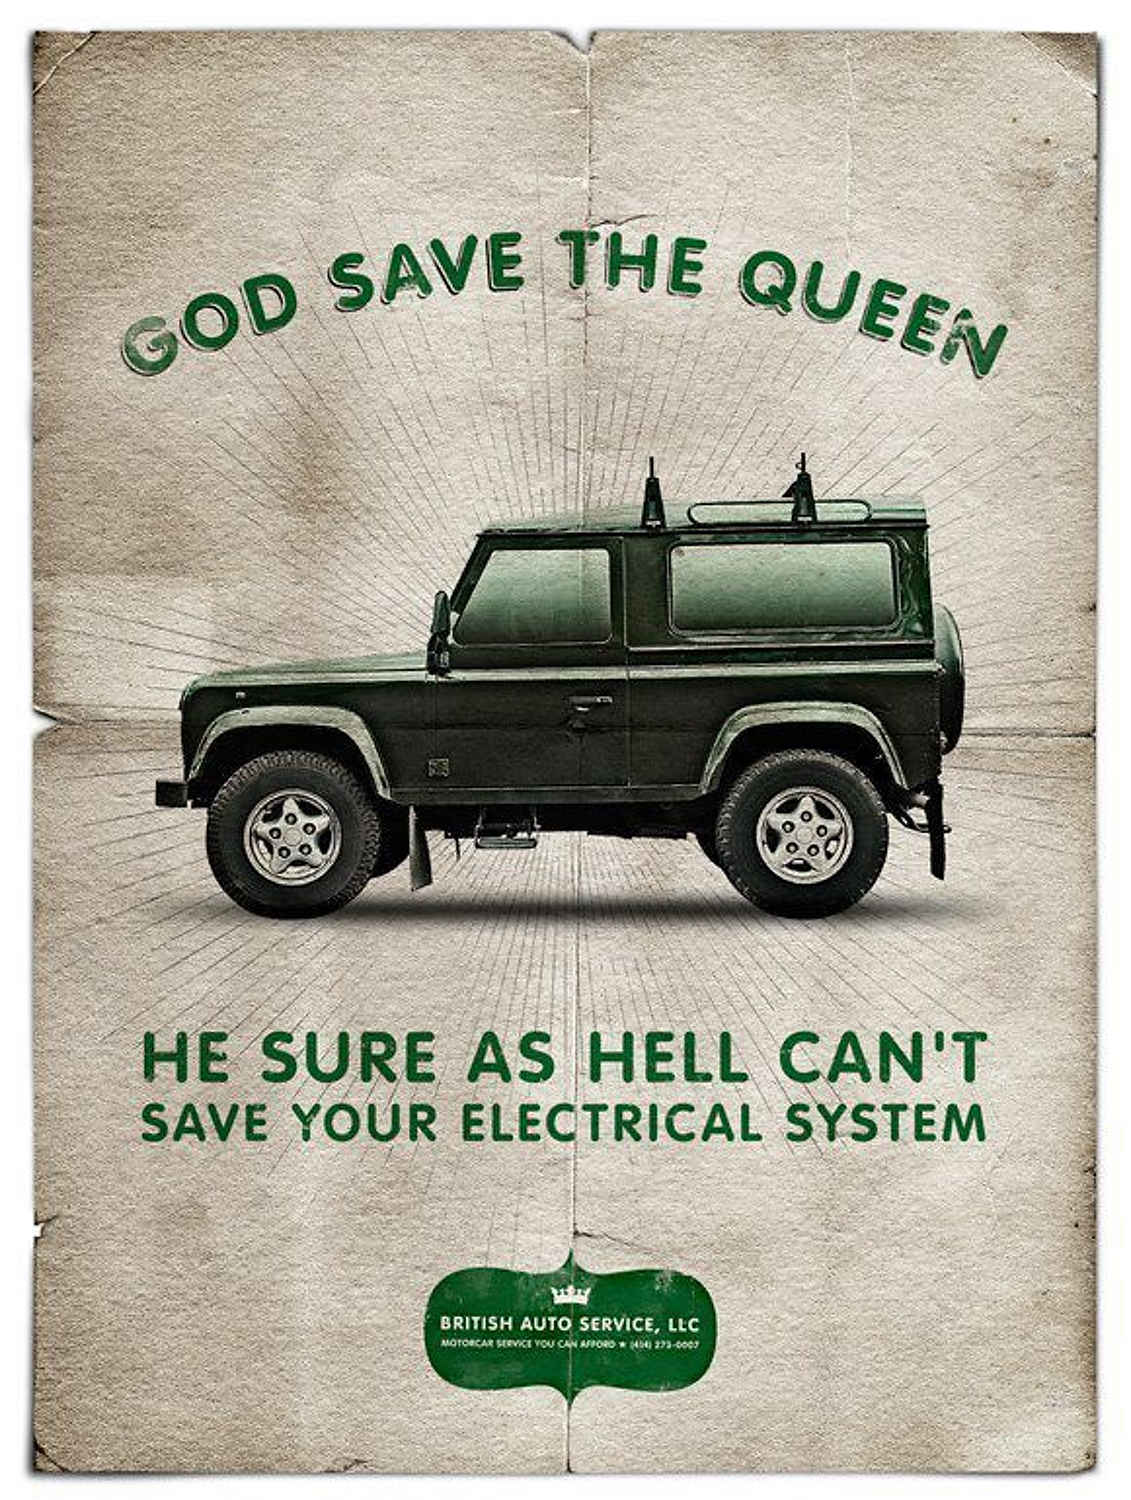 God-Save-The-Queen.jpg